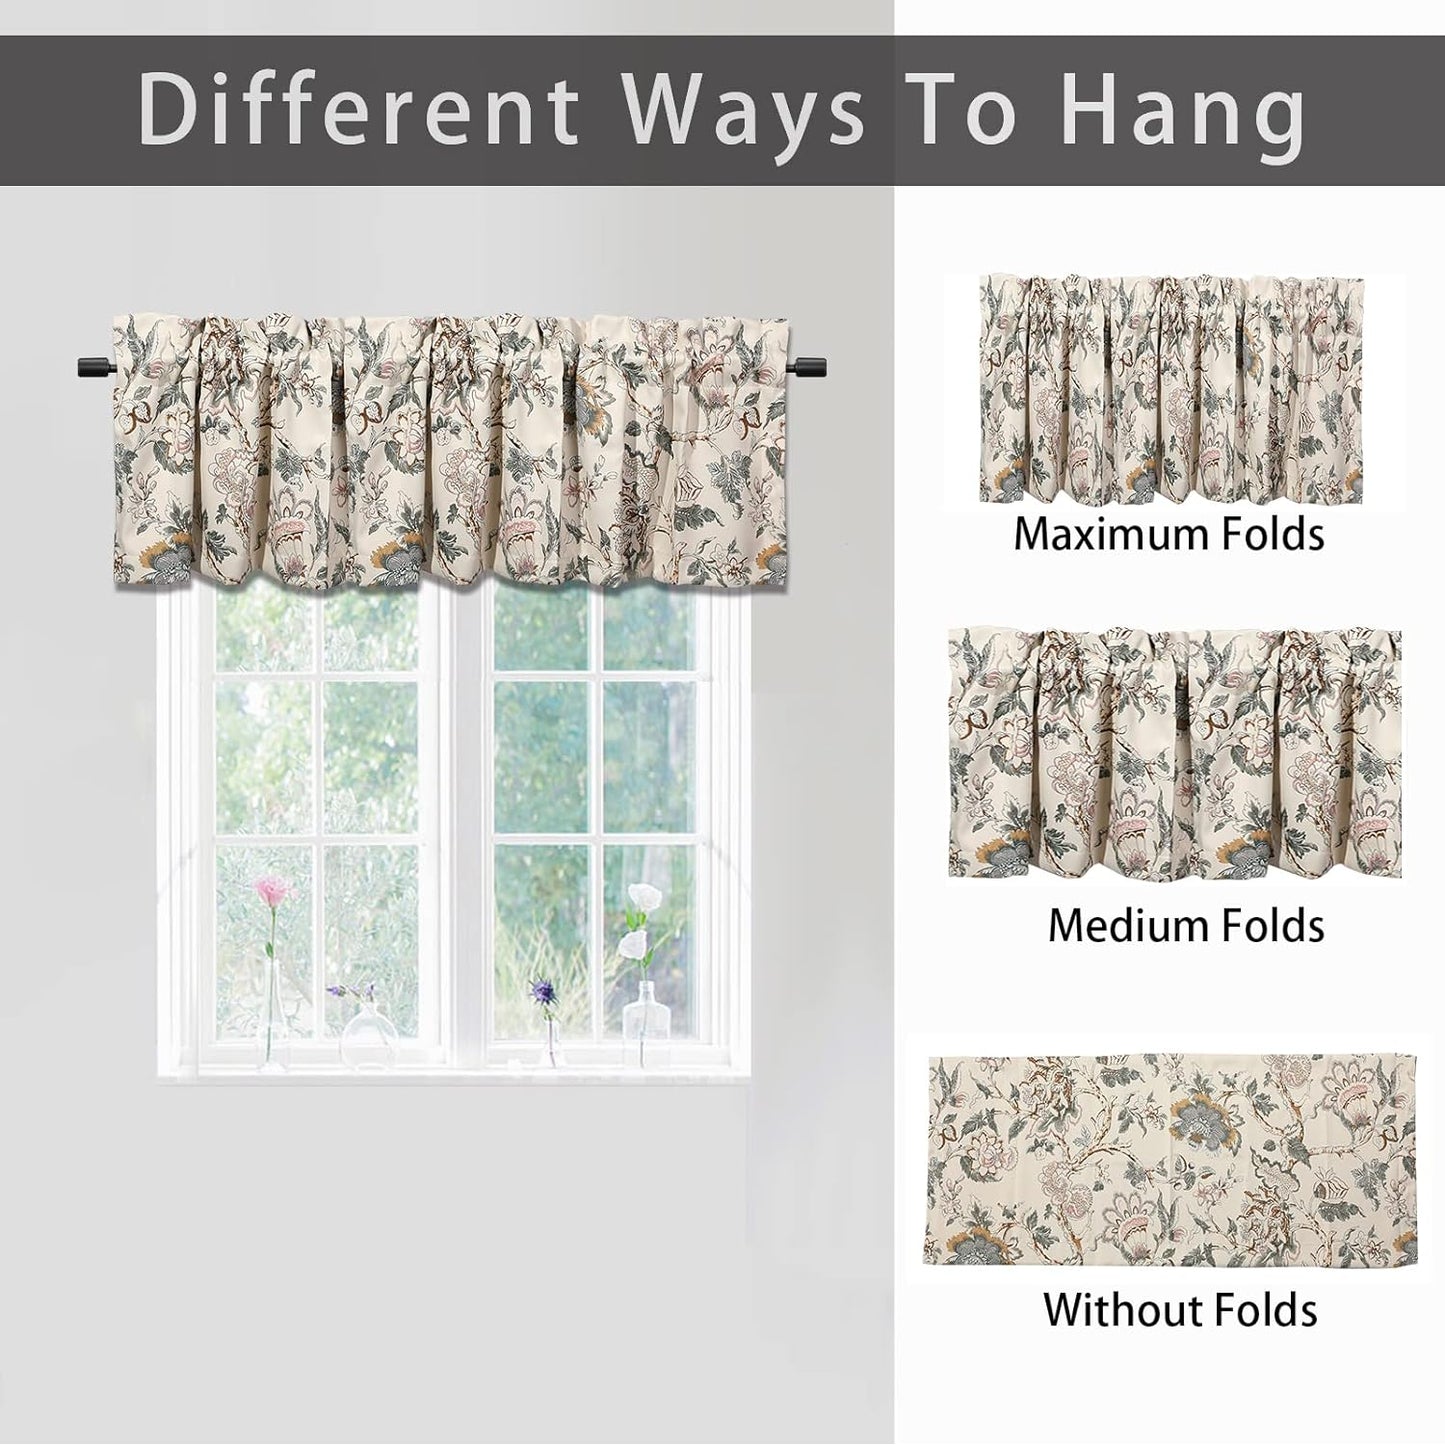 2 Panels Curtain Valances for Windows,52In X18In Blackout Window Treatment Valances,Decorative Valances with 1.9In Rod Pockets,Brown Flower  Athootita   